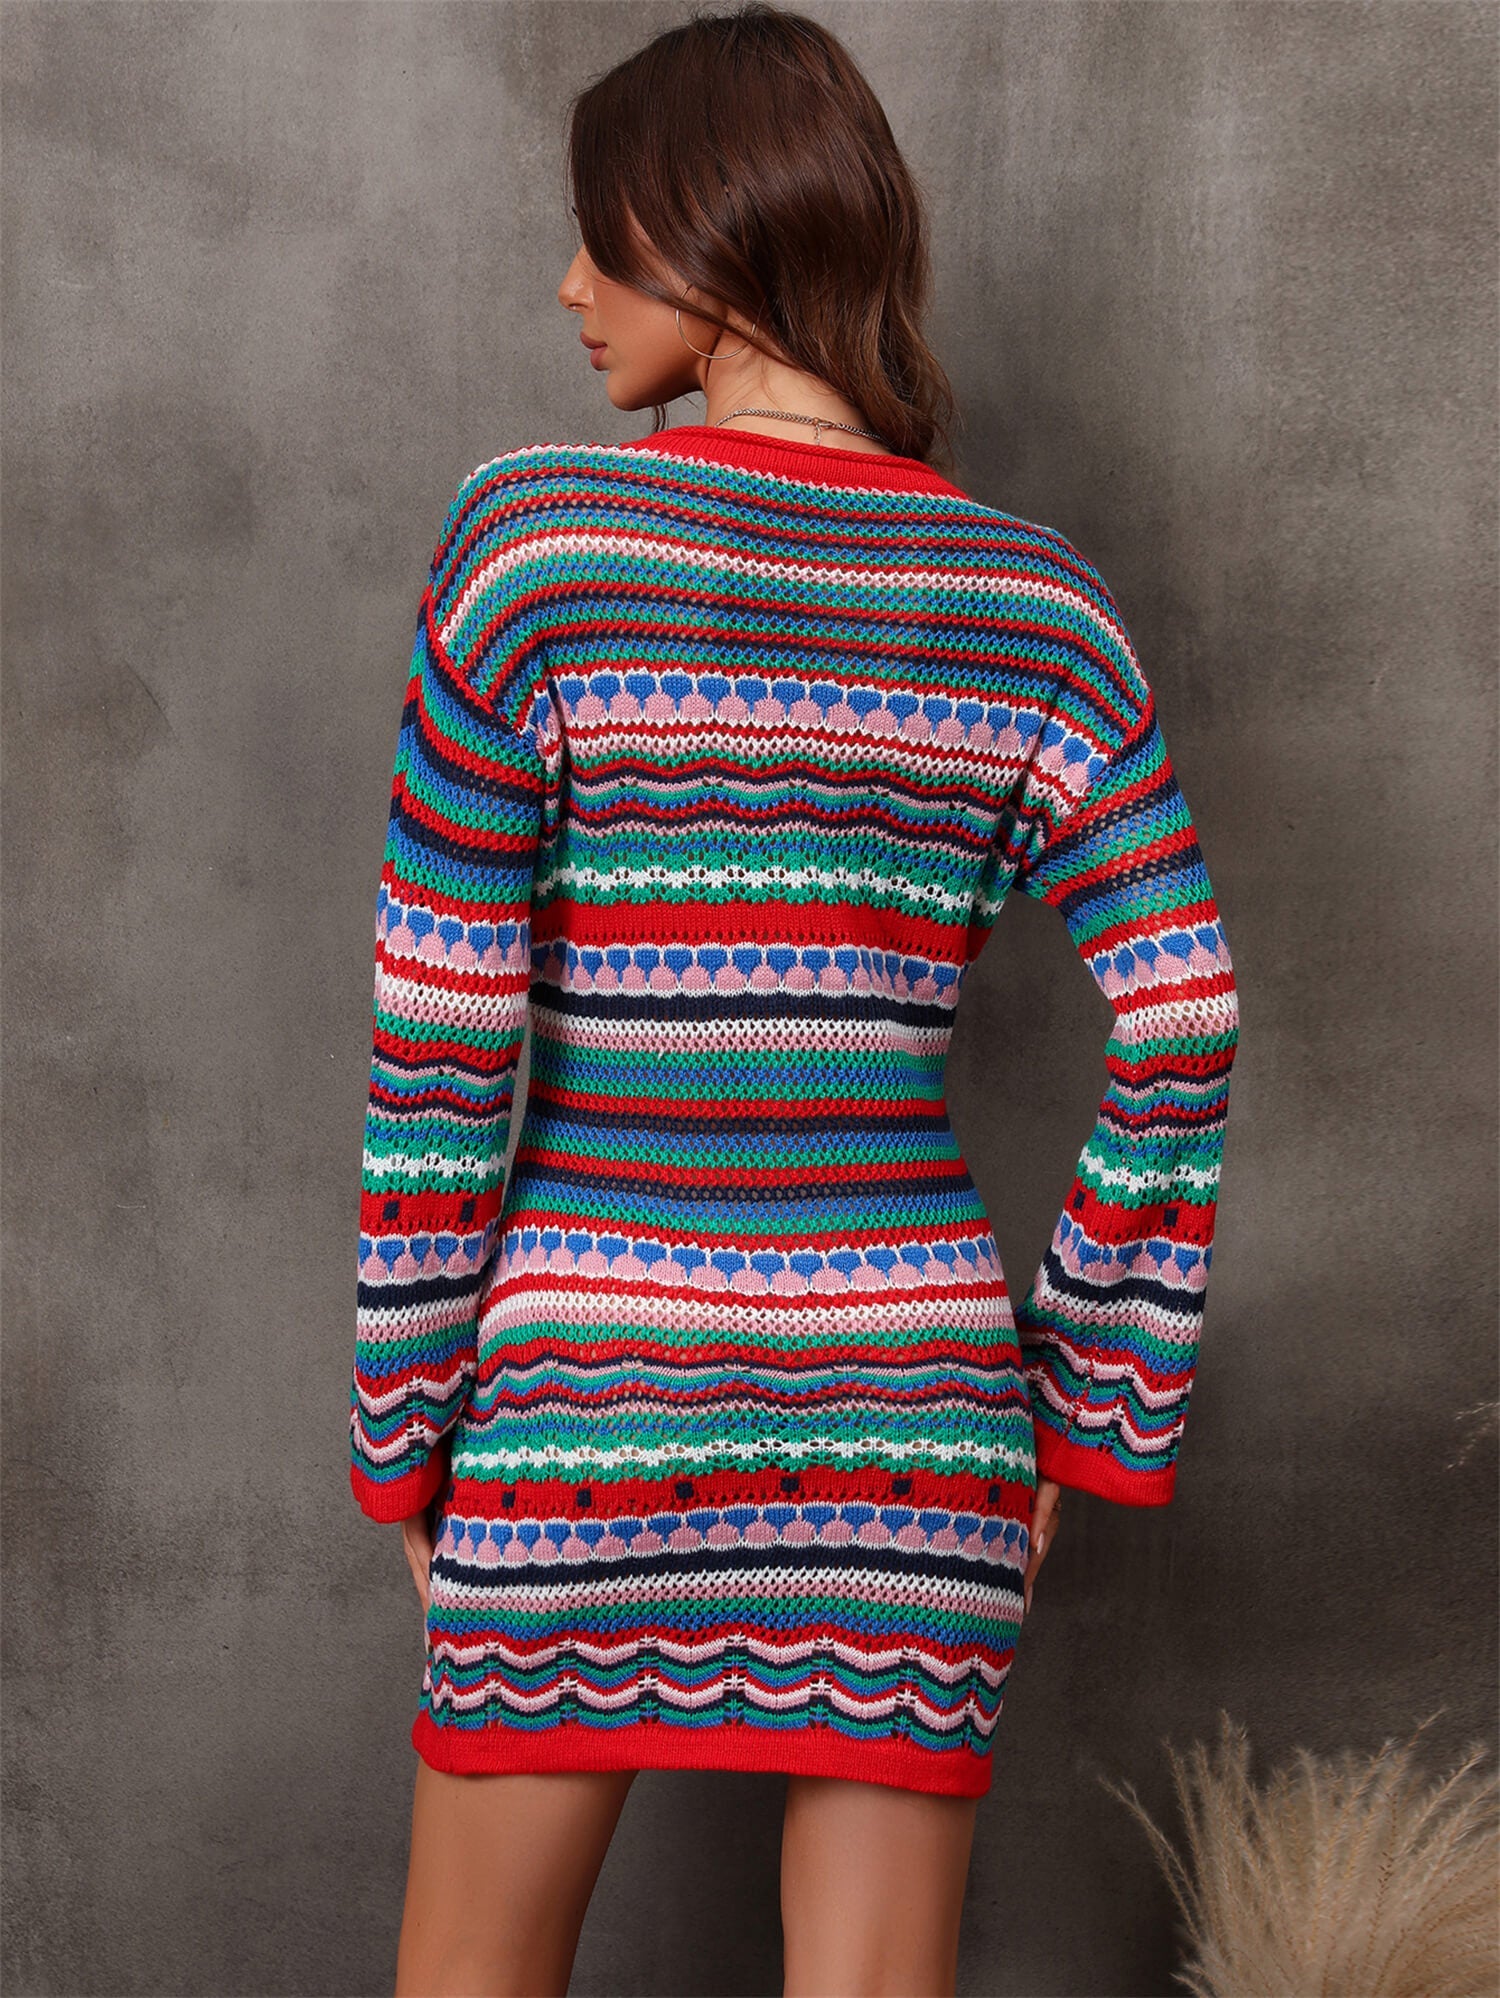 Multicolored Stripe Dropped Shoulder Sweater Dress - Fashion Girl Online Store